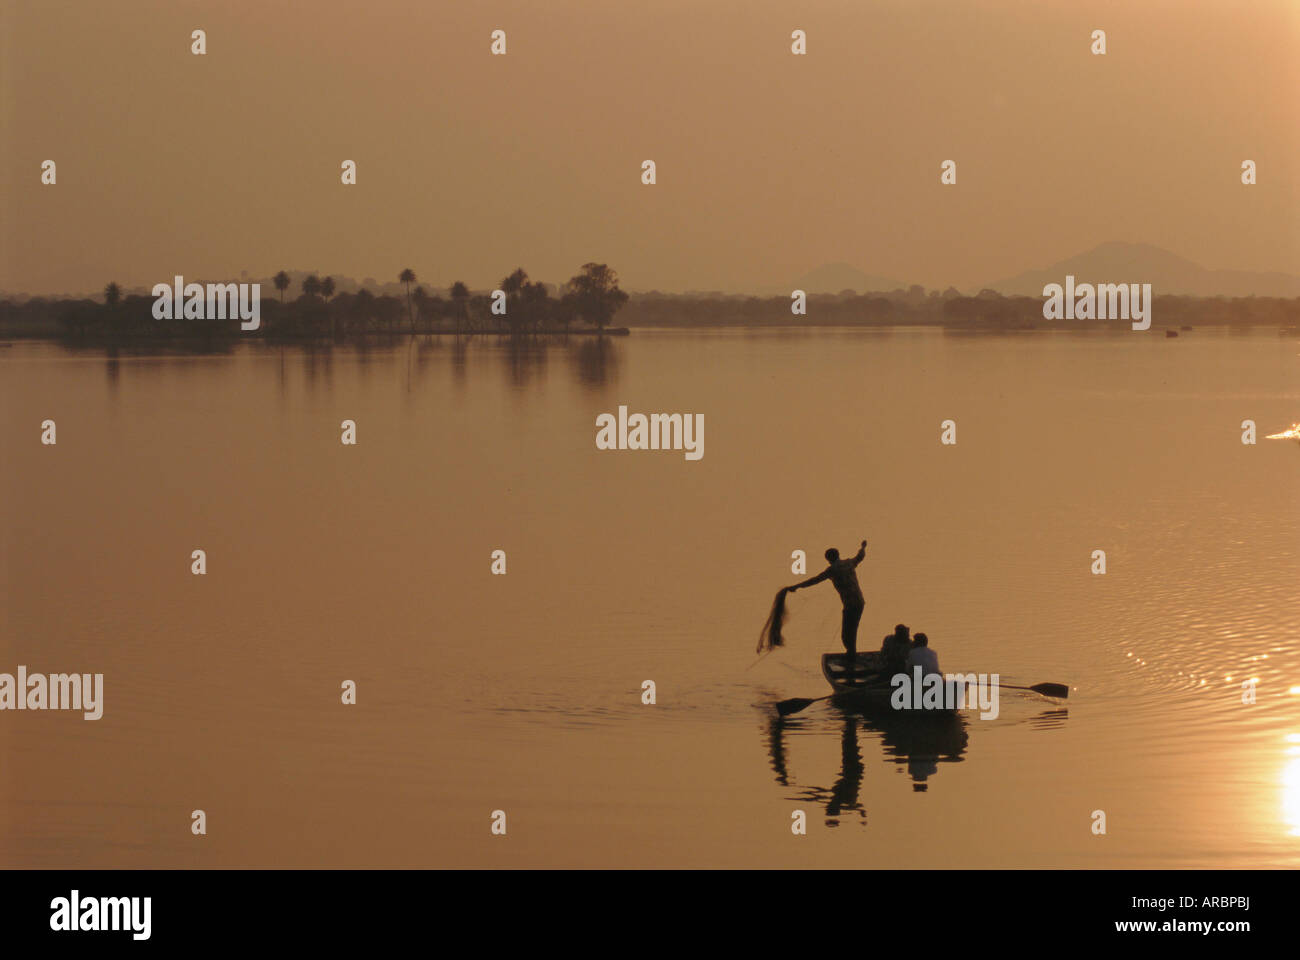 Sunset over lake created by dam, Deogarh, Rajasthan, India Stock Photo